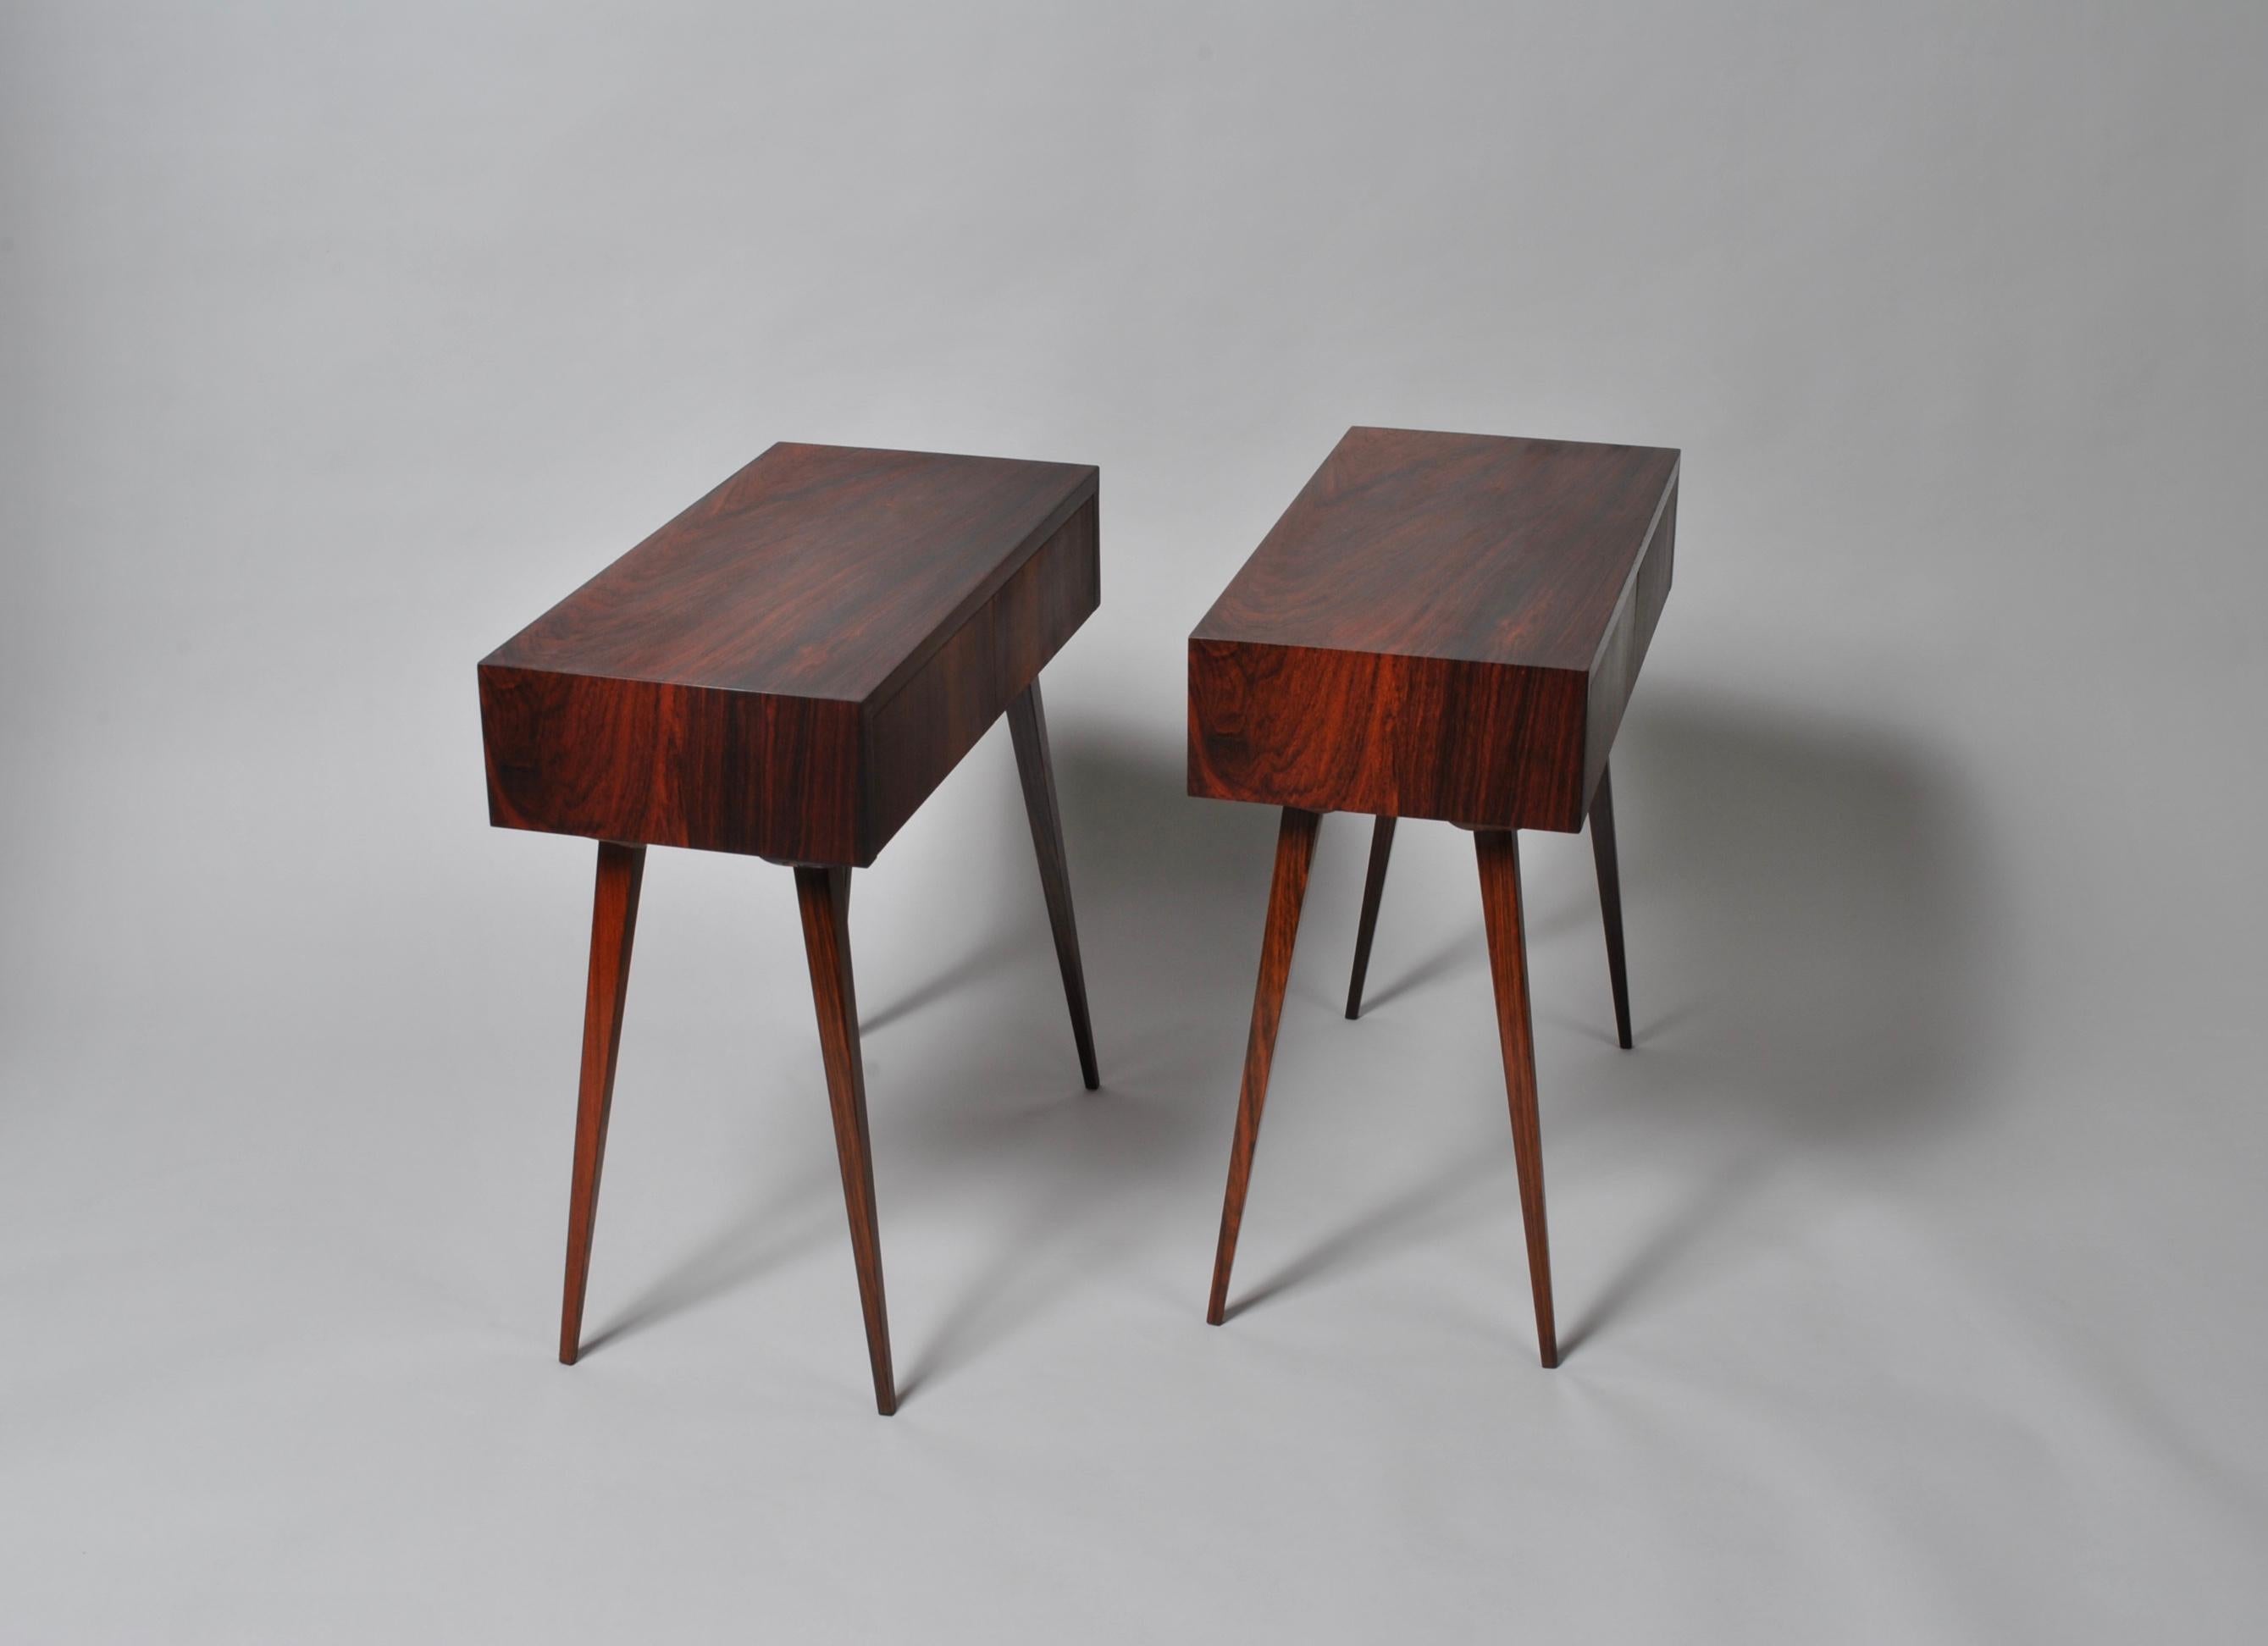 A striking pair of Danish midcentury modernist nightstands or end tables. Handmade one of a kind pieces, circa 1960, Denmark. Tall slender tapering angular legs. Each table has 2 small drawers. Very clever use of the veneer to wrap the boxes and